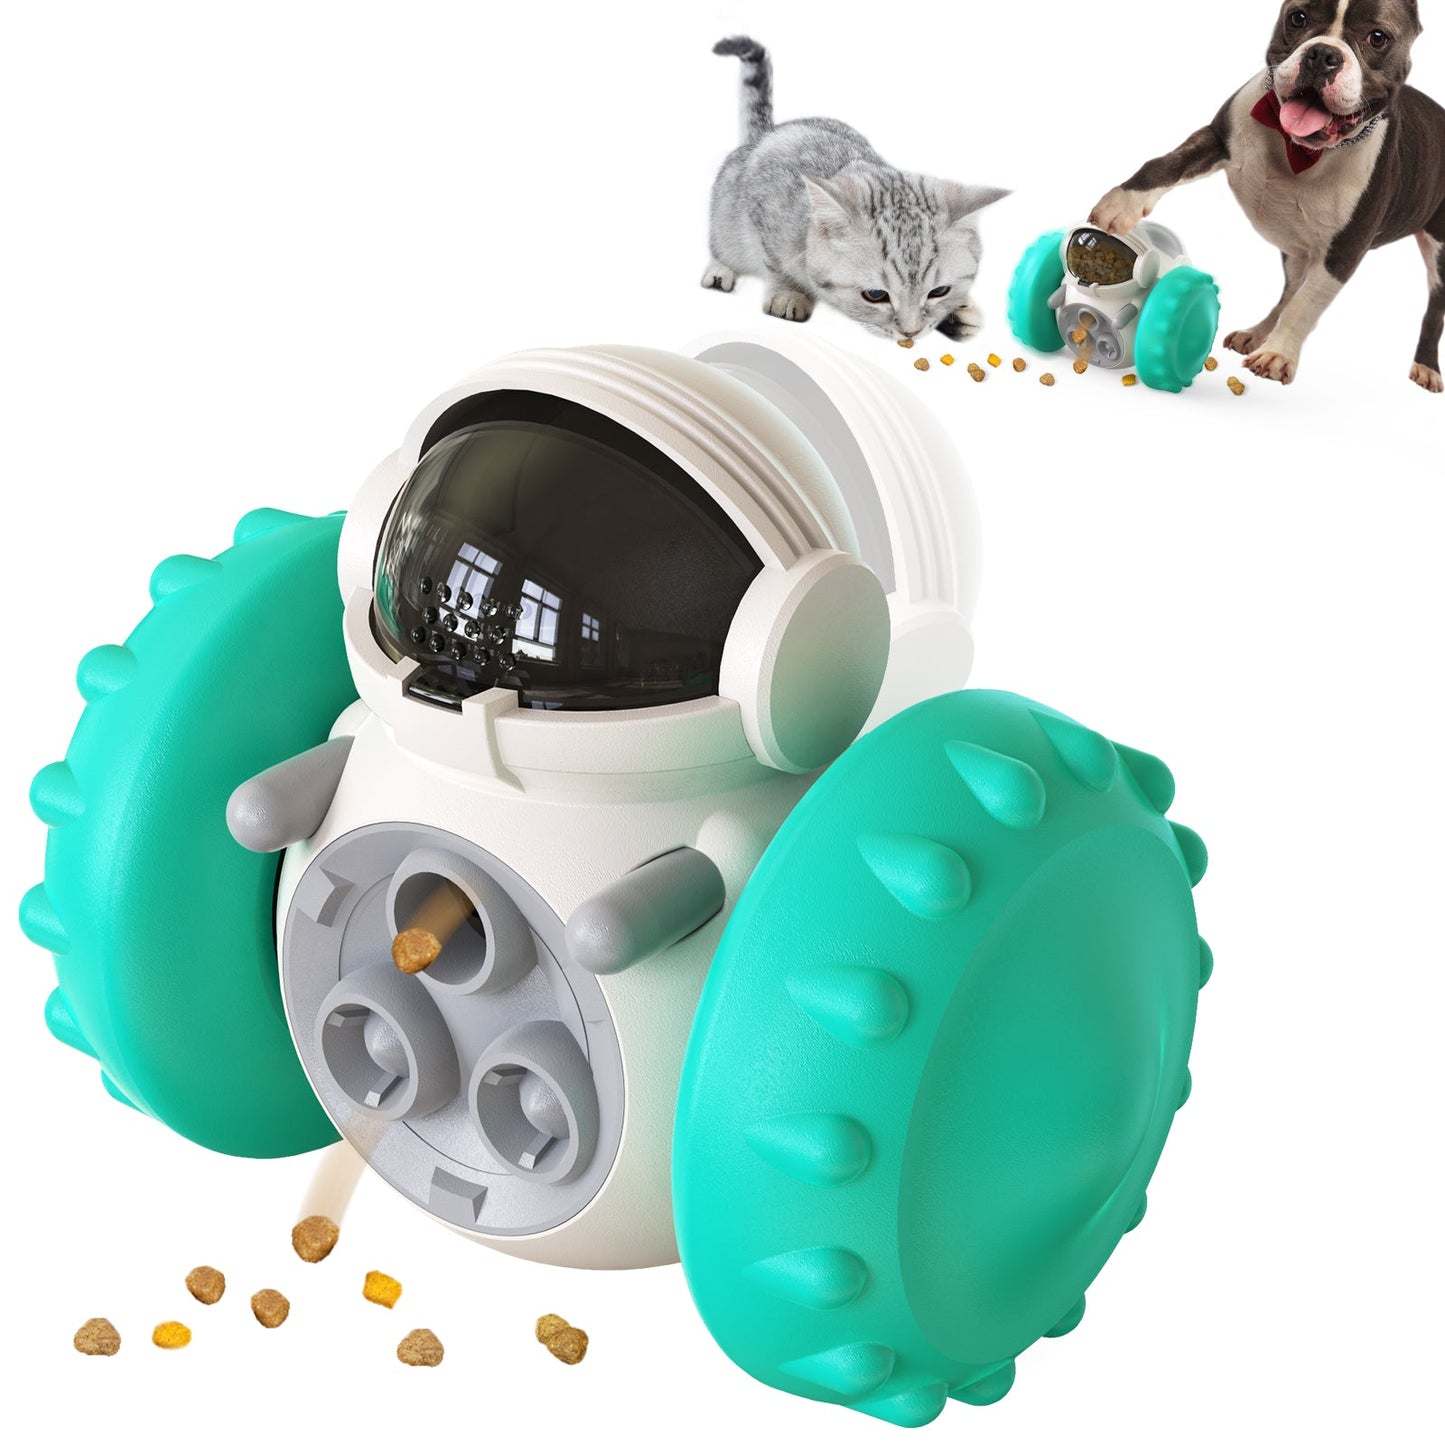 1pc Blue Pet Interactive Slow Feeder Ball Toy For Dogs, Pet Bowl